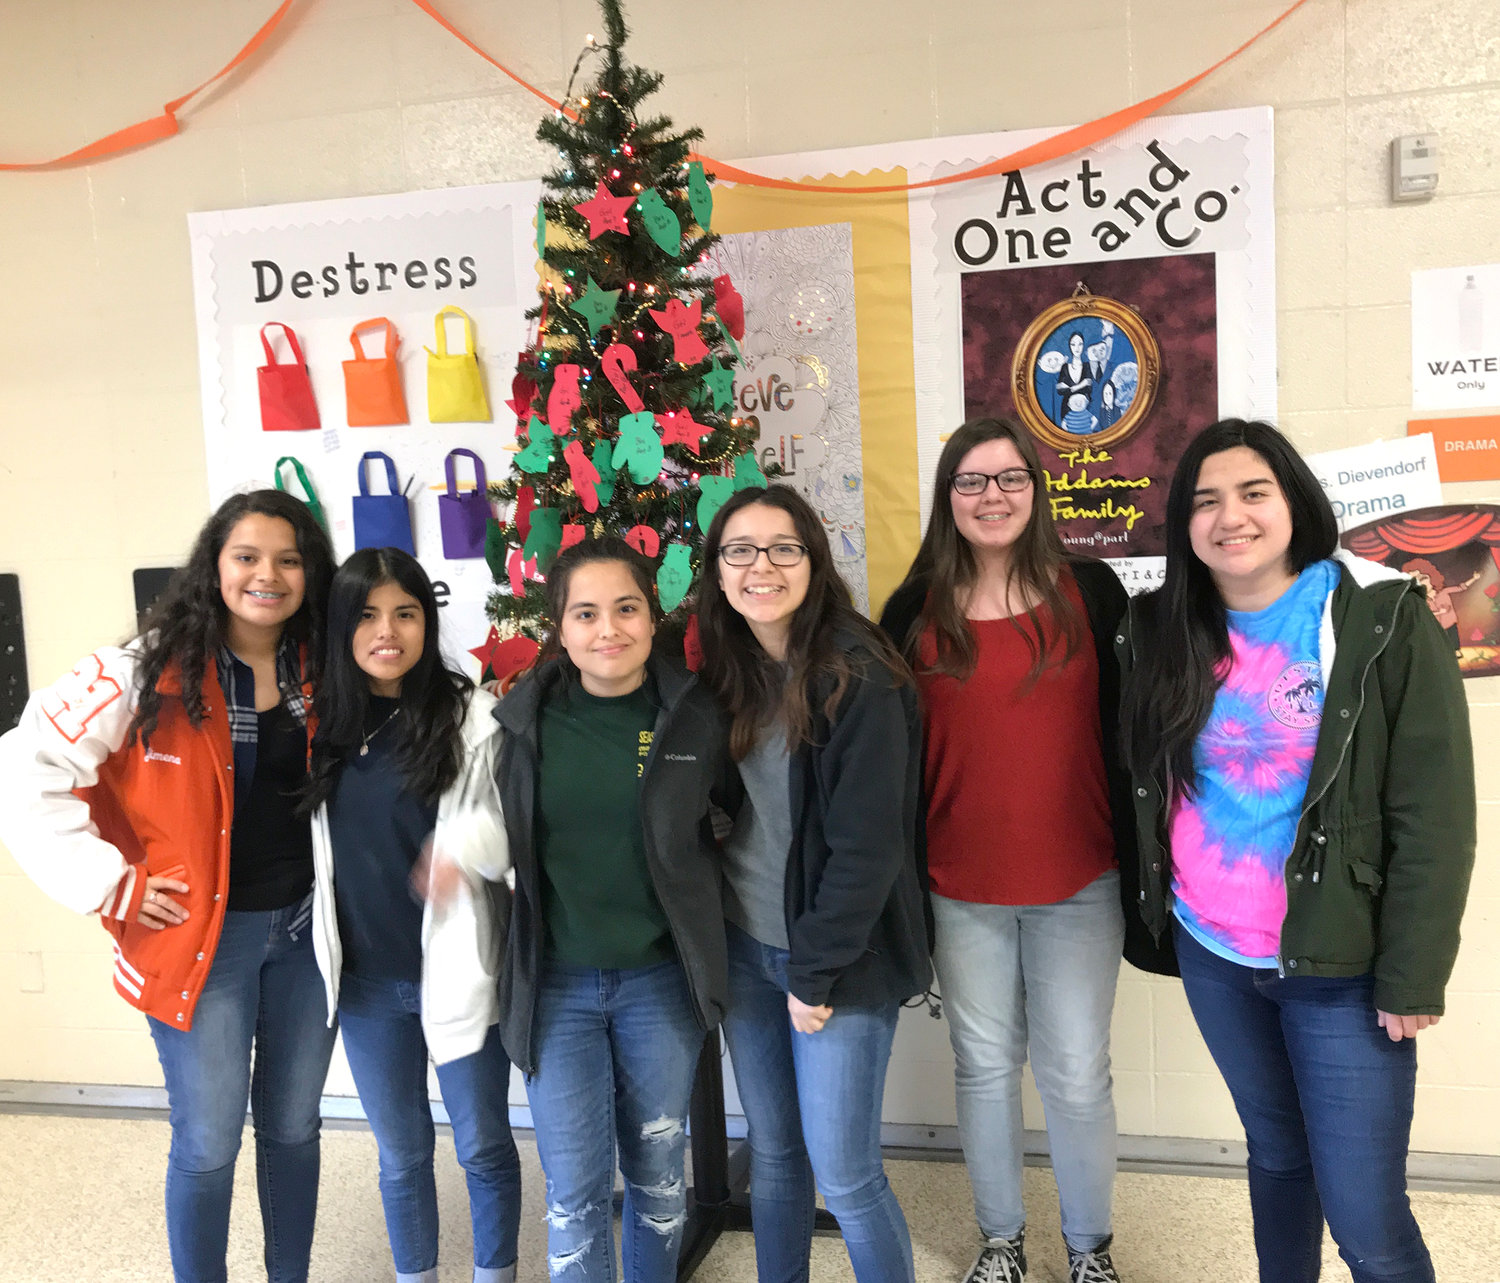 Members of the MHS Anchor club decorated a Giving tree in the lobby of the high school last week. (Courtesy photo)